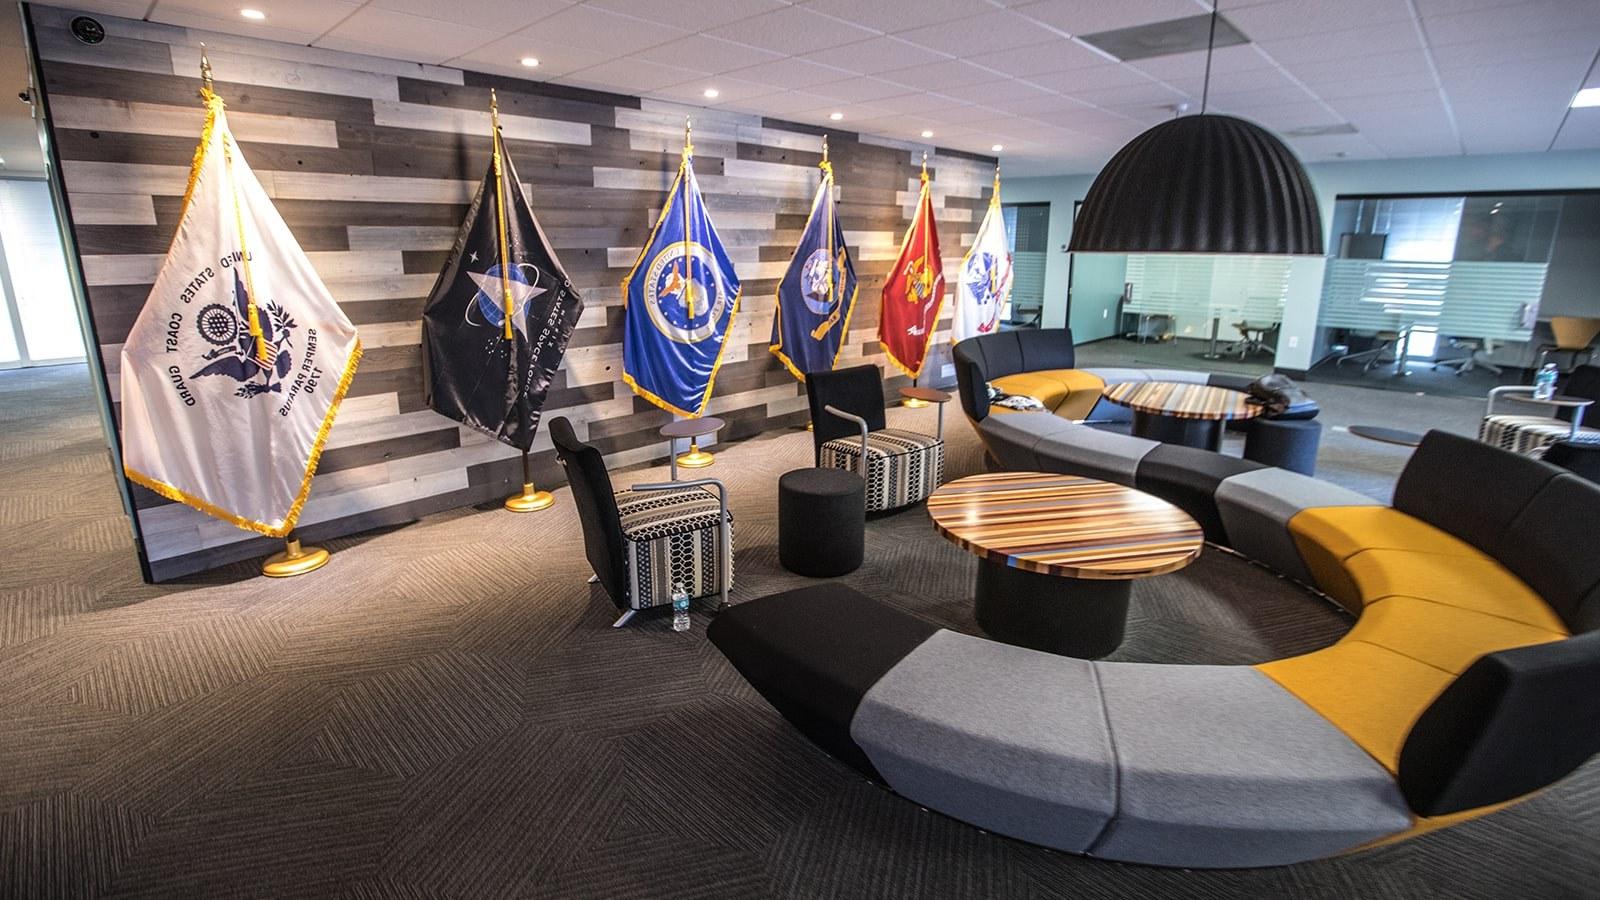 An image of 满帆’s 军事 Student Success center shows a large couch, small meeting rooms, 和 flags representing each branch of the US Armed Services.